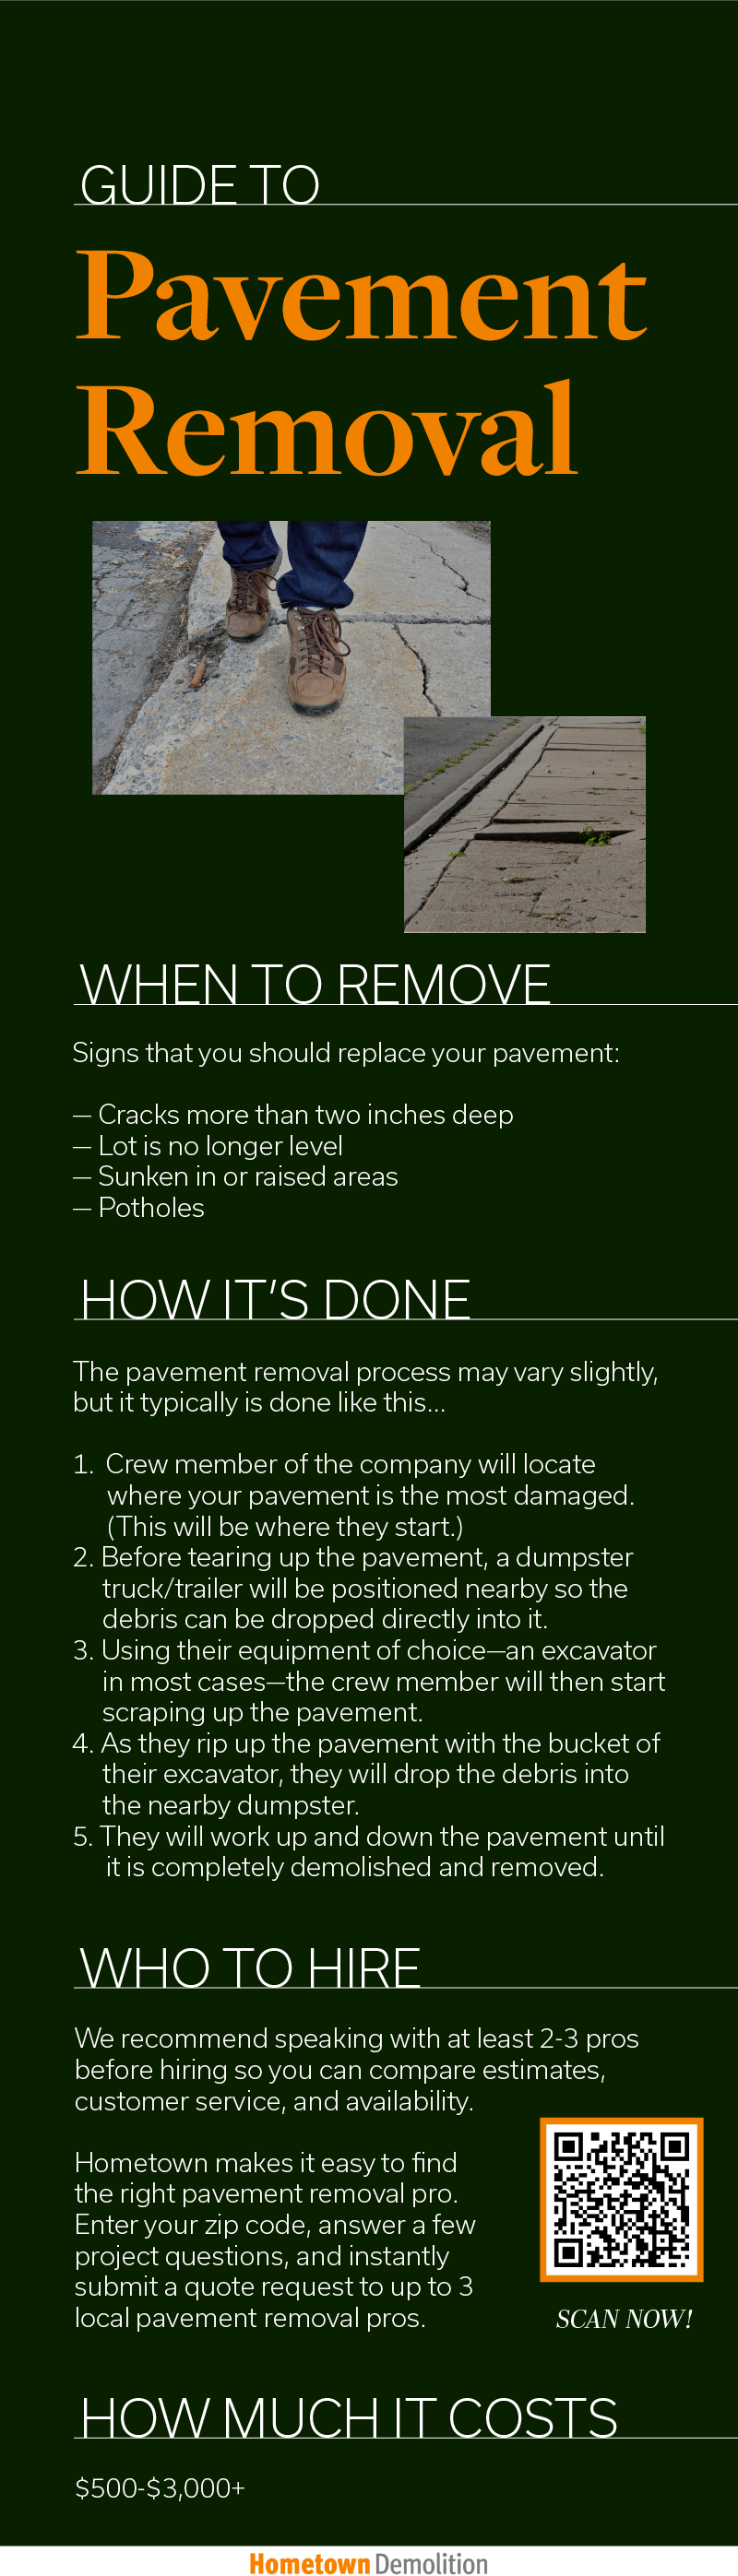 infographic about pavement removal